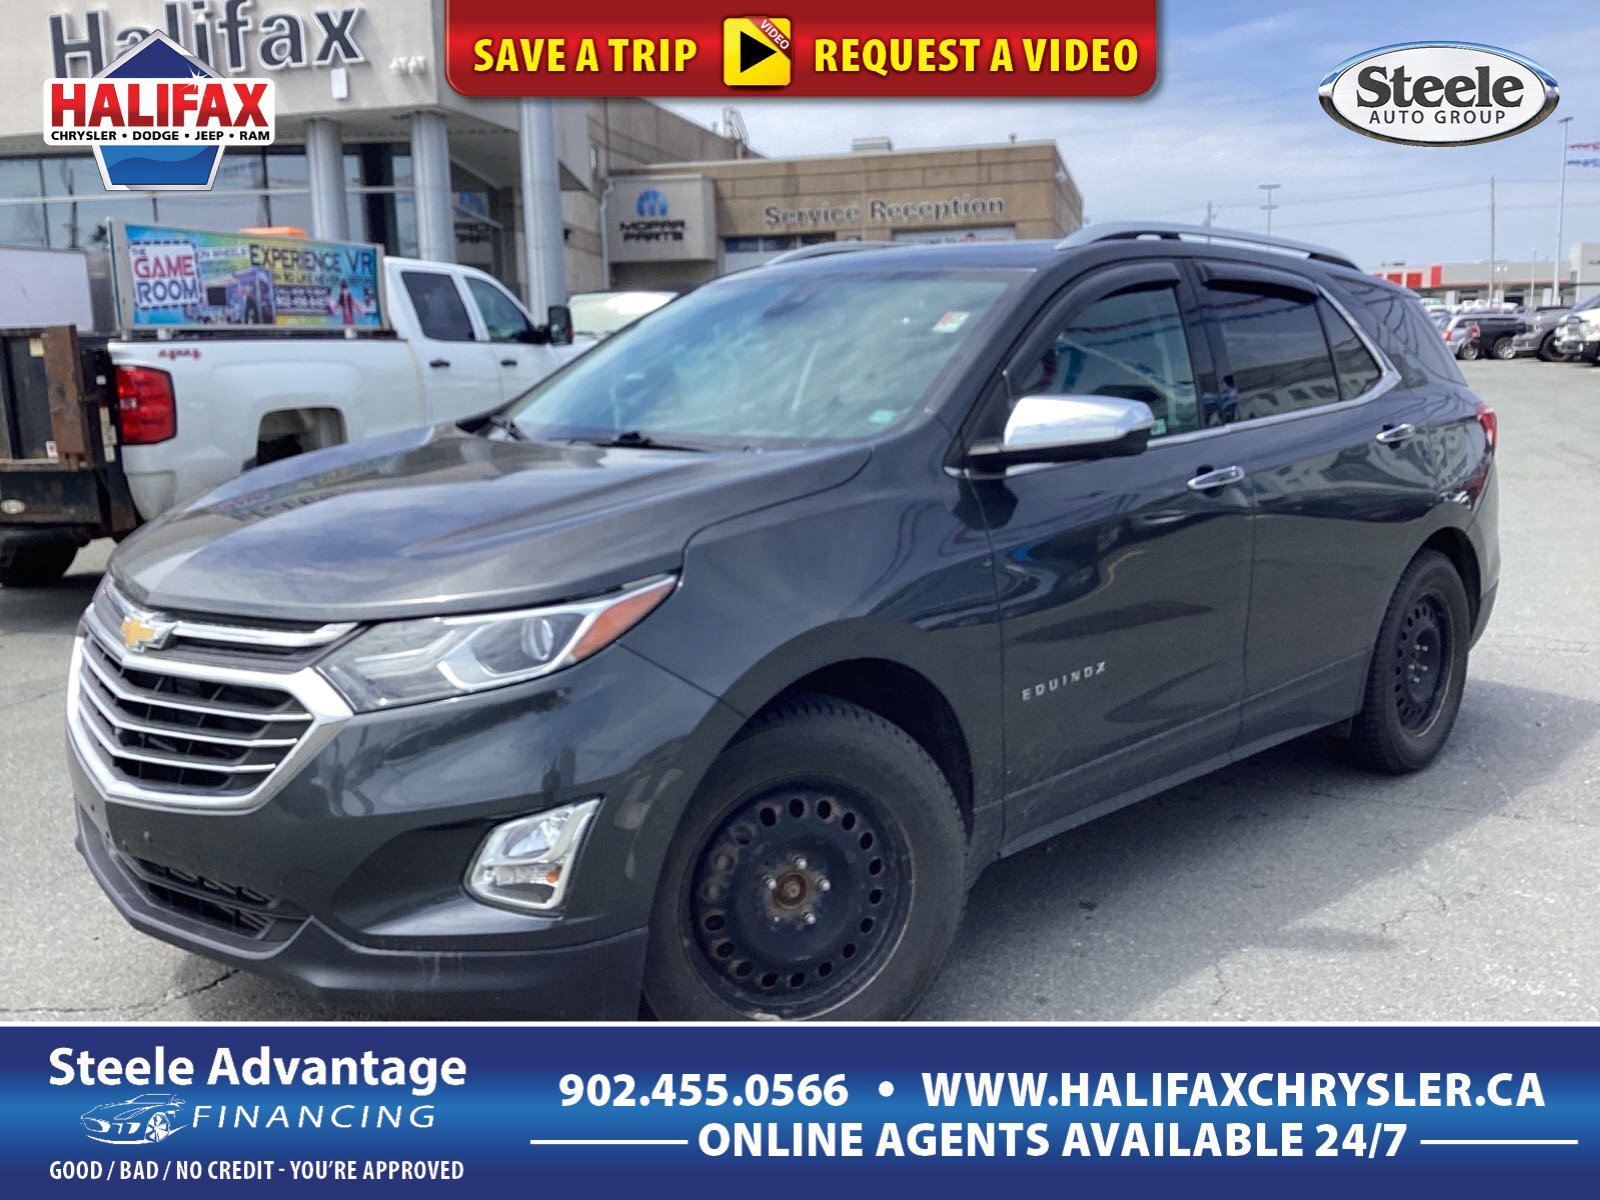 2019 Chevrolet Equinox Premier - AWD, NAV, HEATED AND COOLED LEATHER, PAN